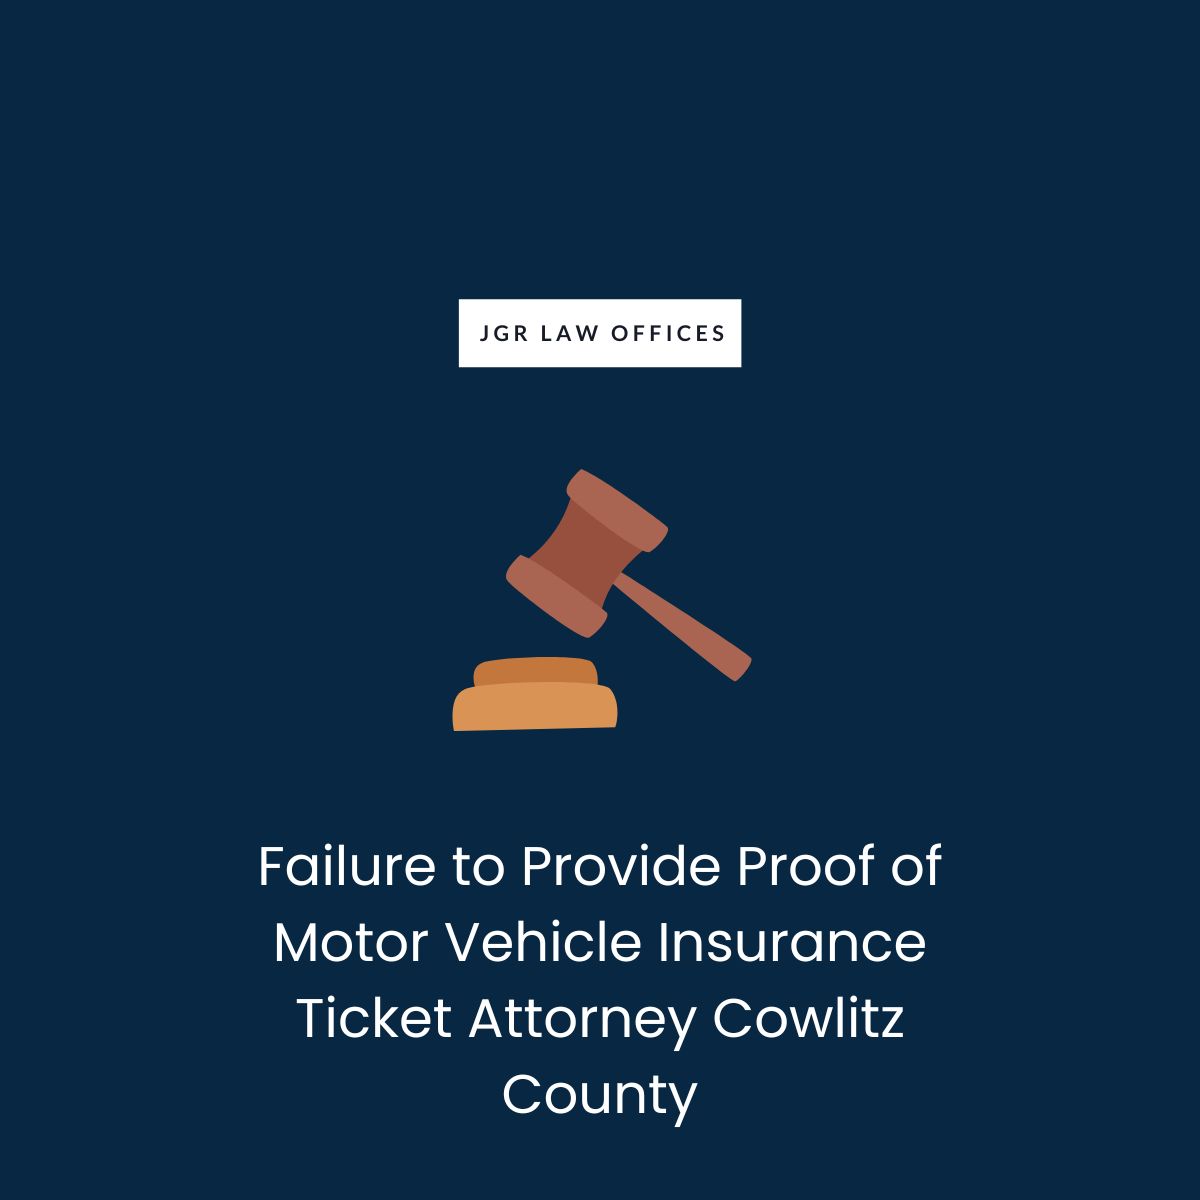 Failure to Provide Proof of Motor Vehicle Insurance Ticket Attorney Cowlitz County